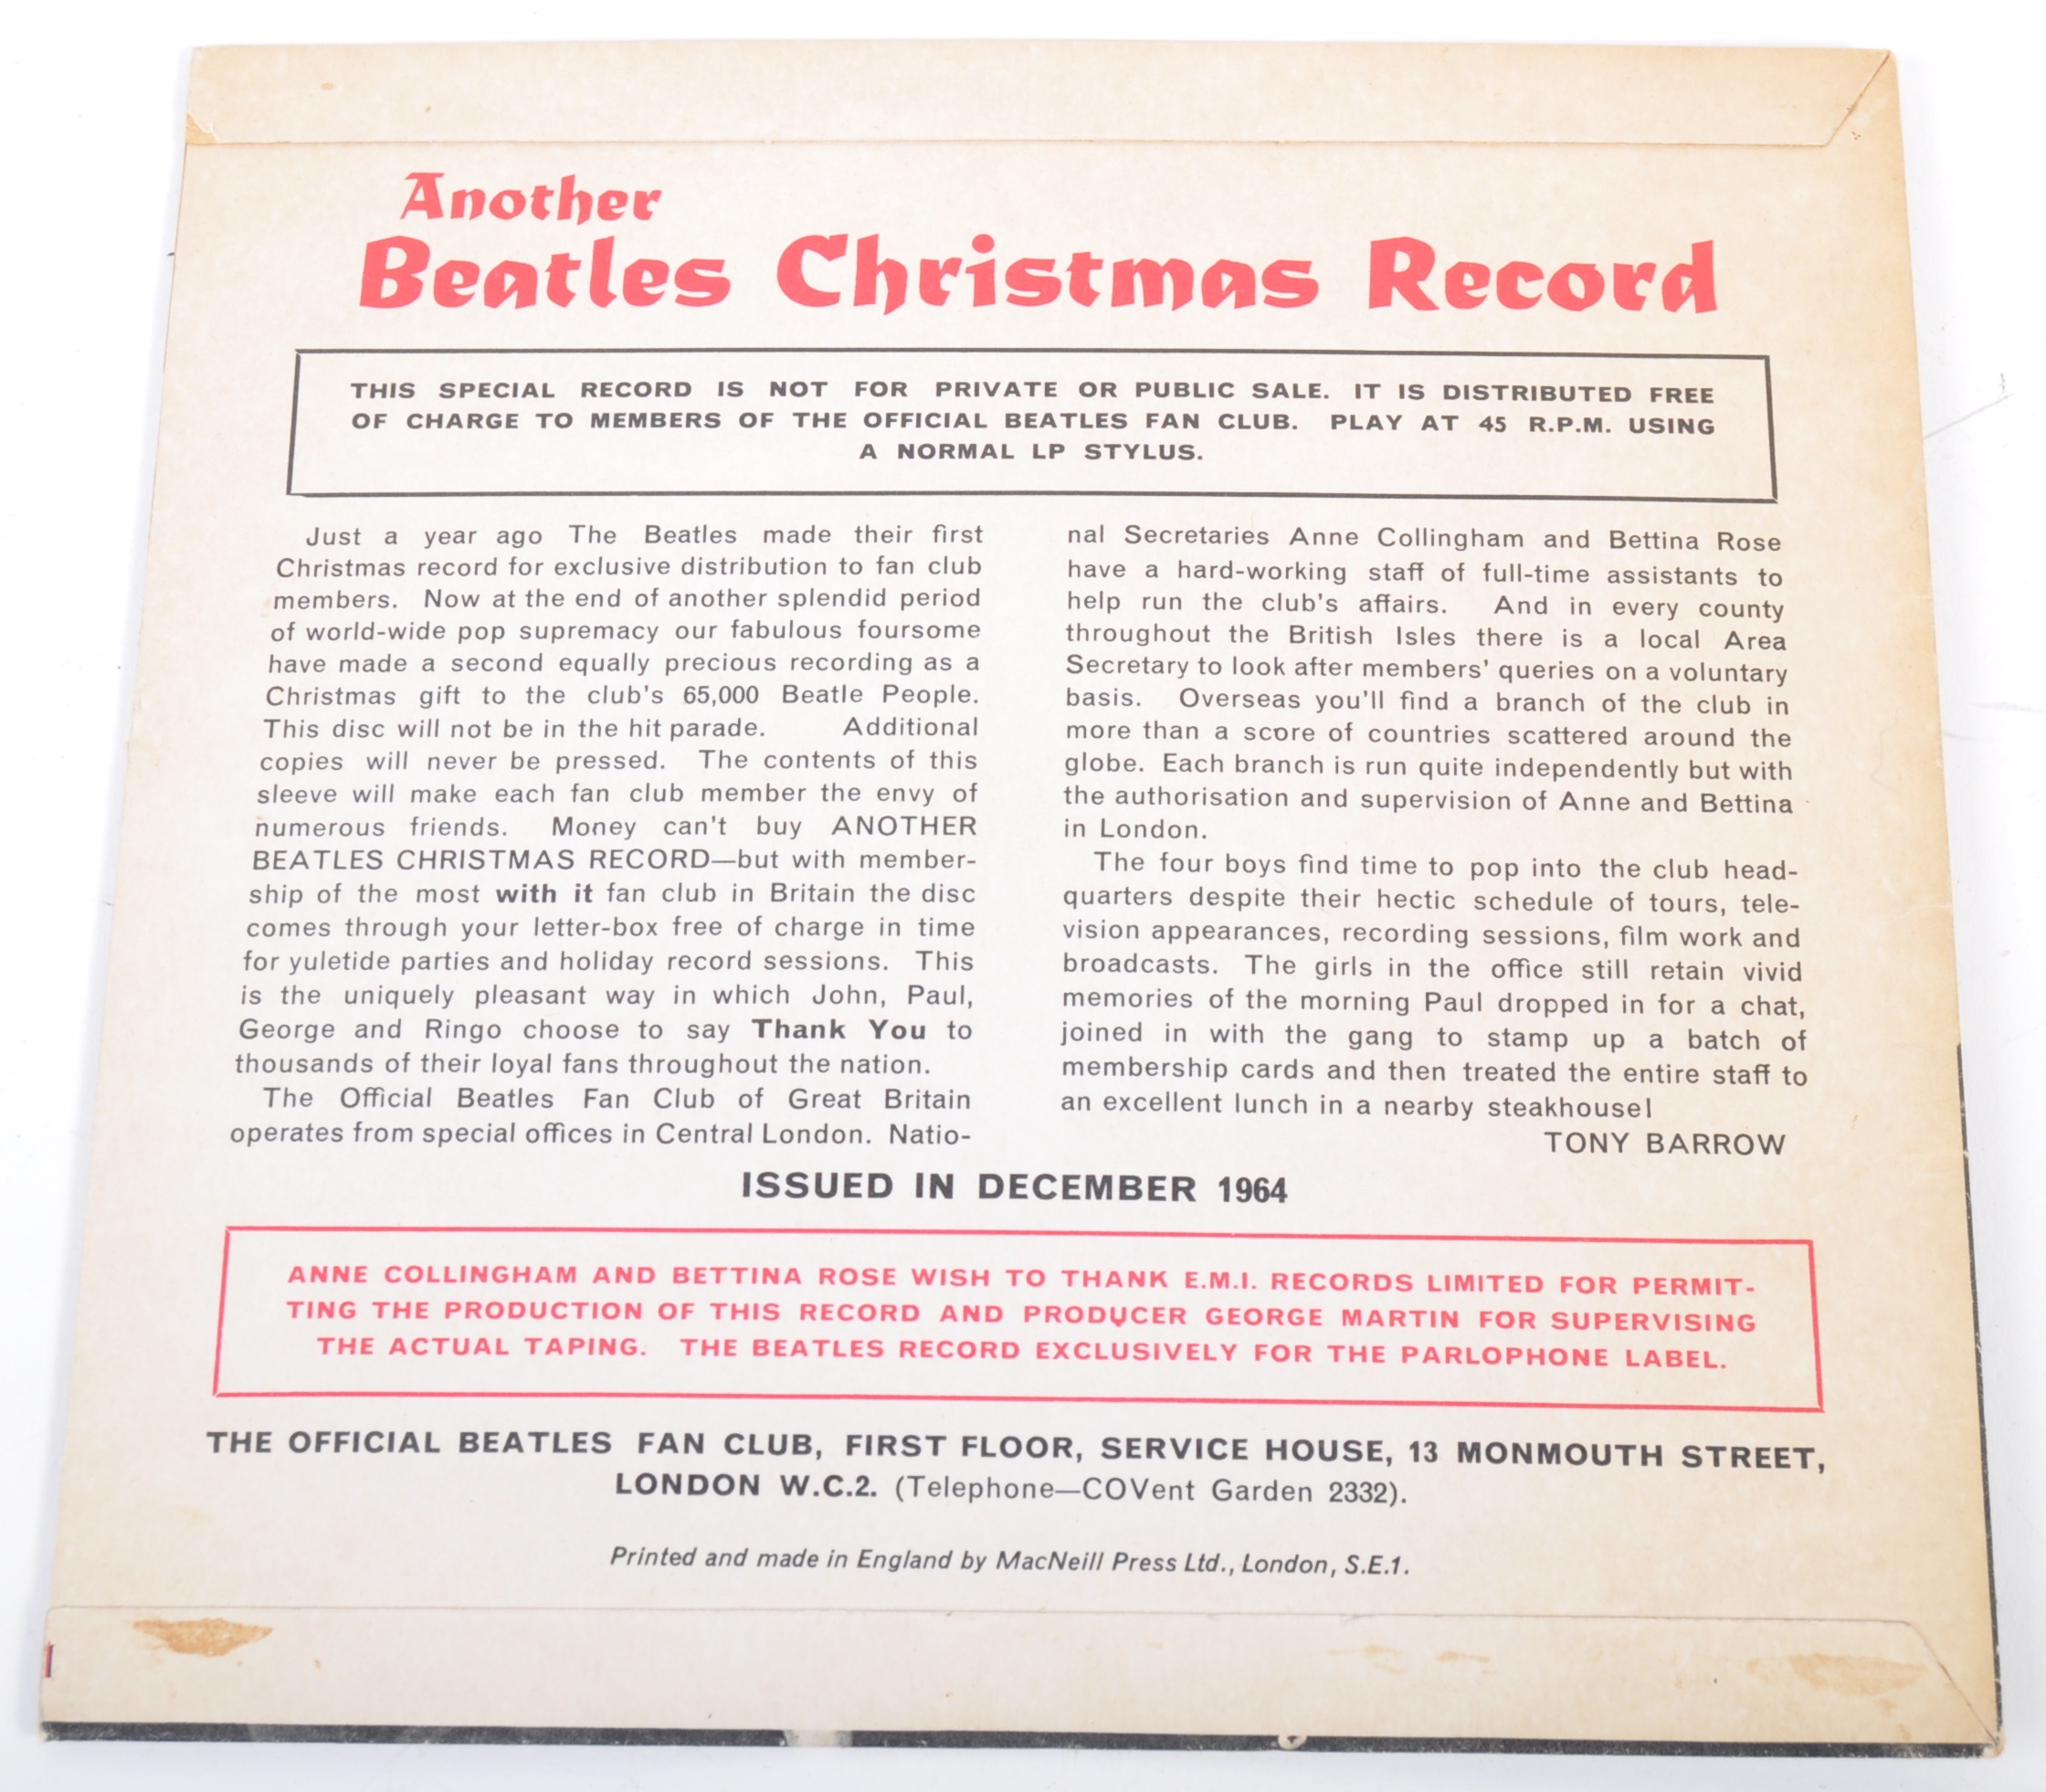 THE BEATLES - 1964 CHRISTMAS FLEXI DISC - Image 2 of 4